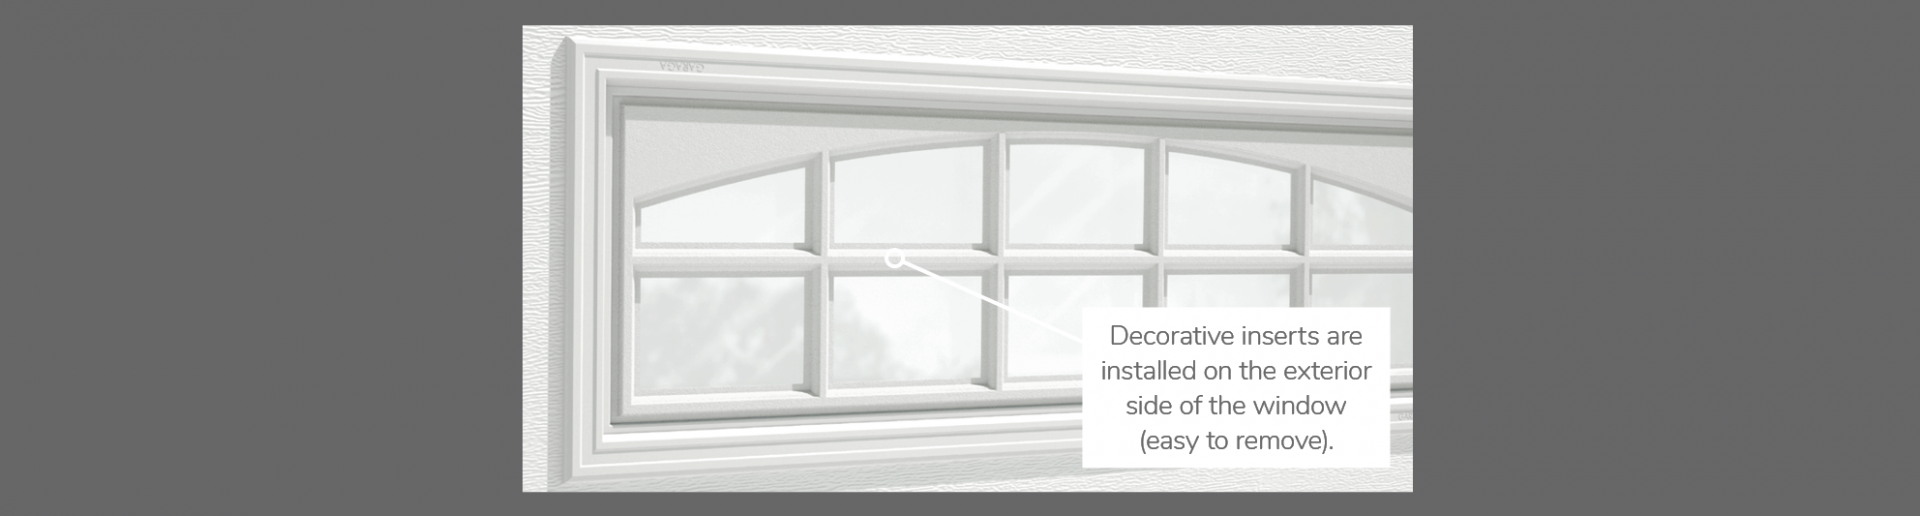 Cascade Decorative Insert, 40" x 13", available for door R-16 and R-12